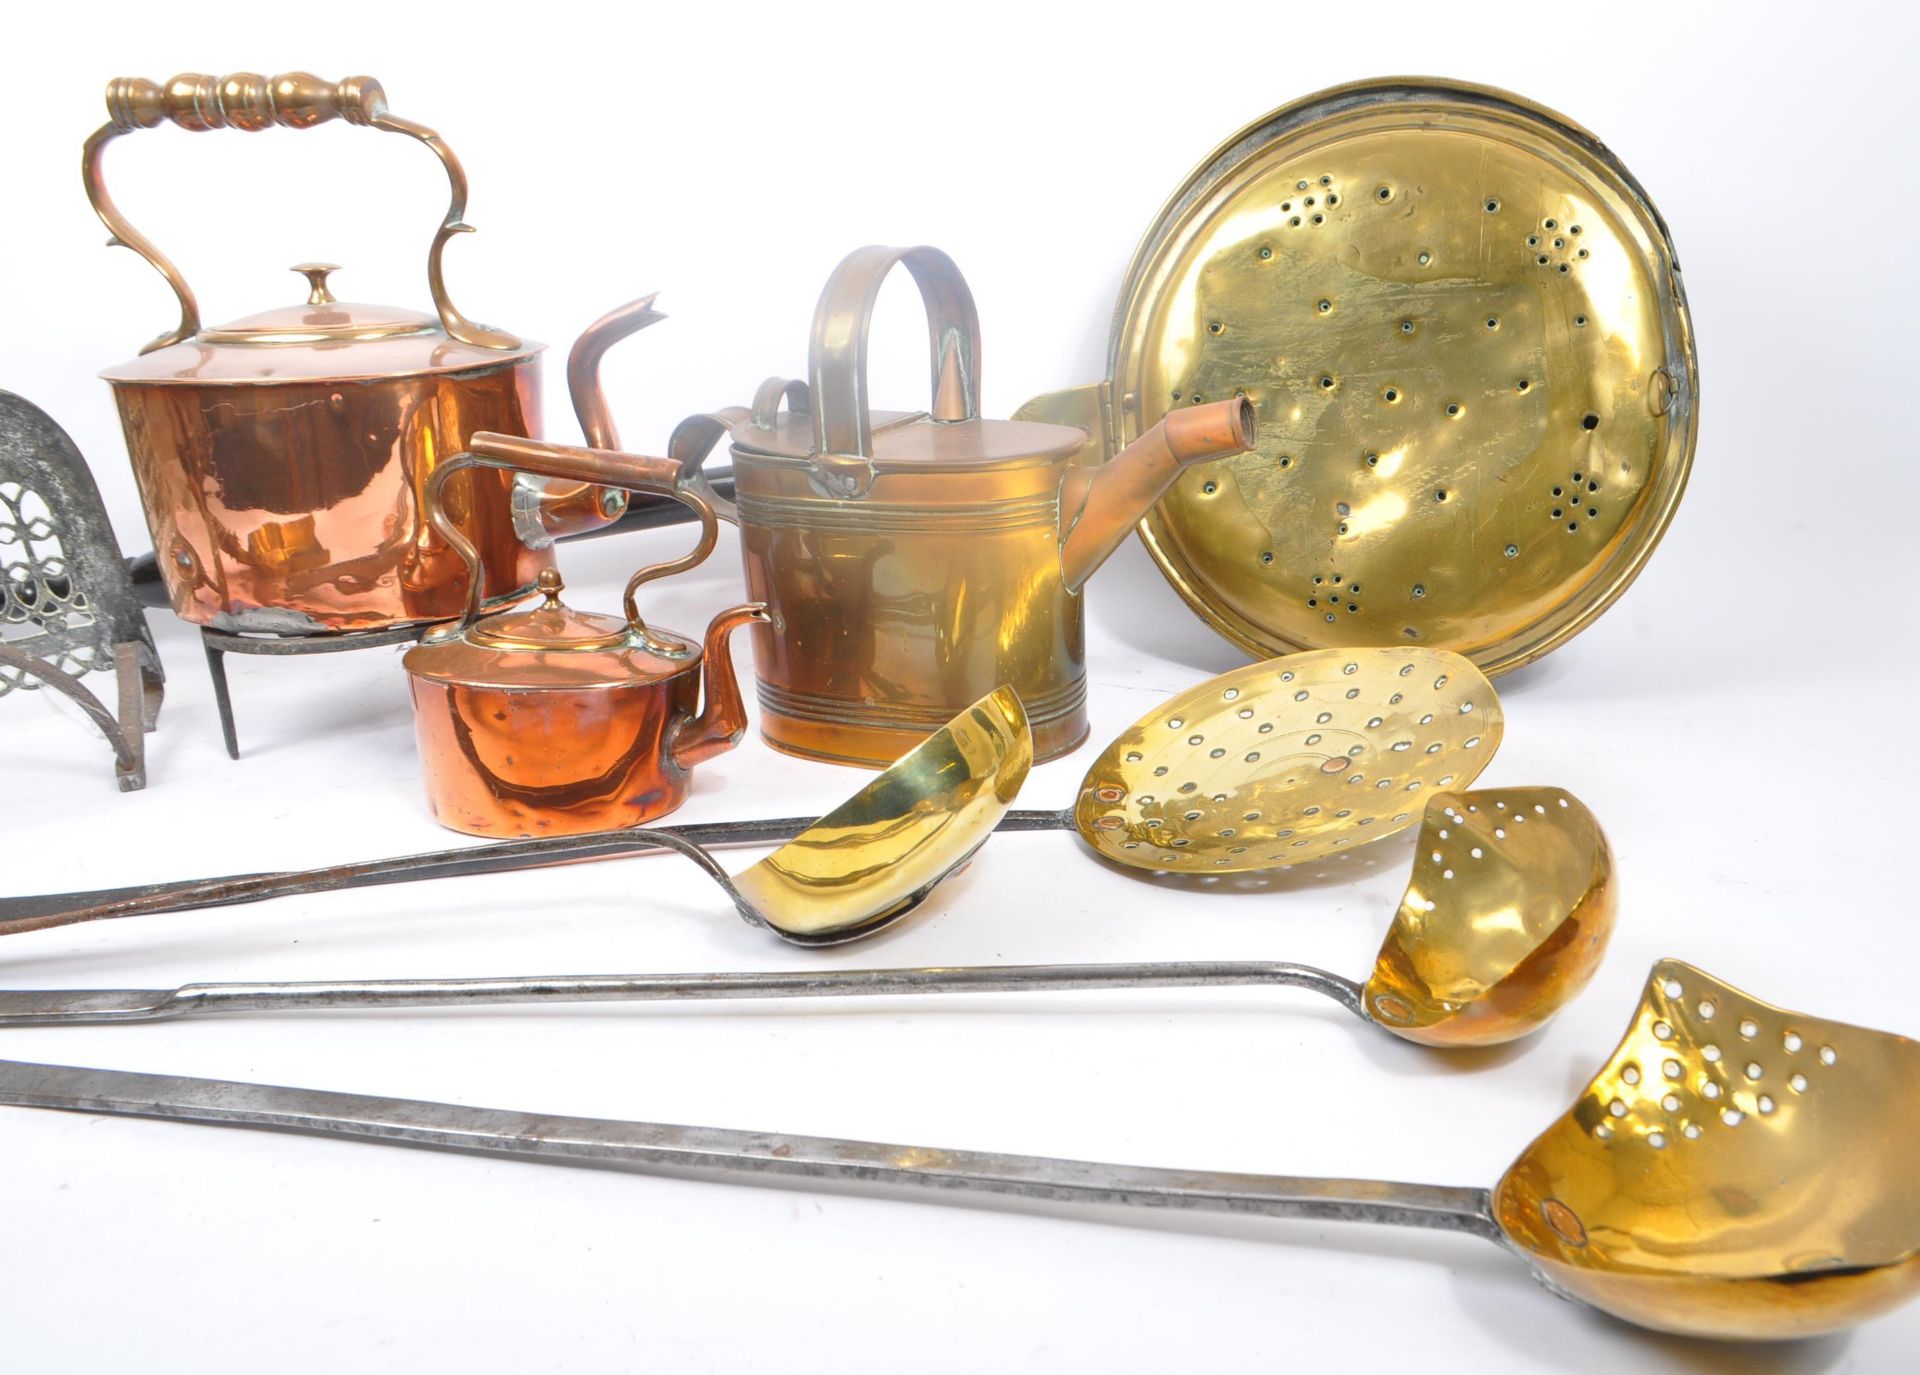 COLLECTION OF 19TH CENTURY BRASS COPPER IRON FIRESIDE WARE - Image 5 of 11